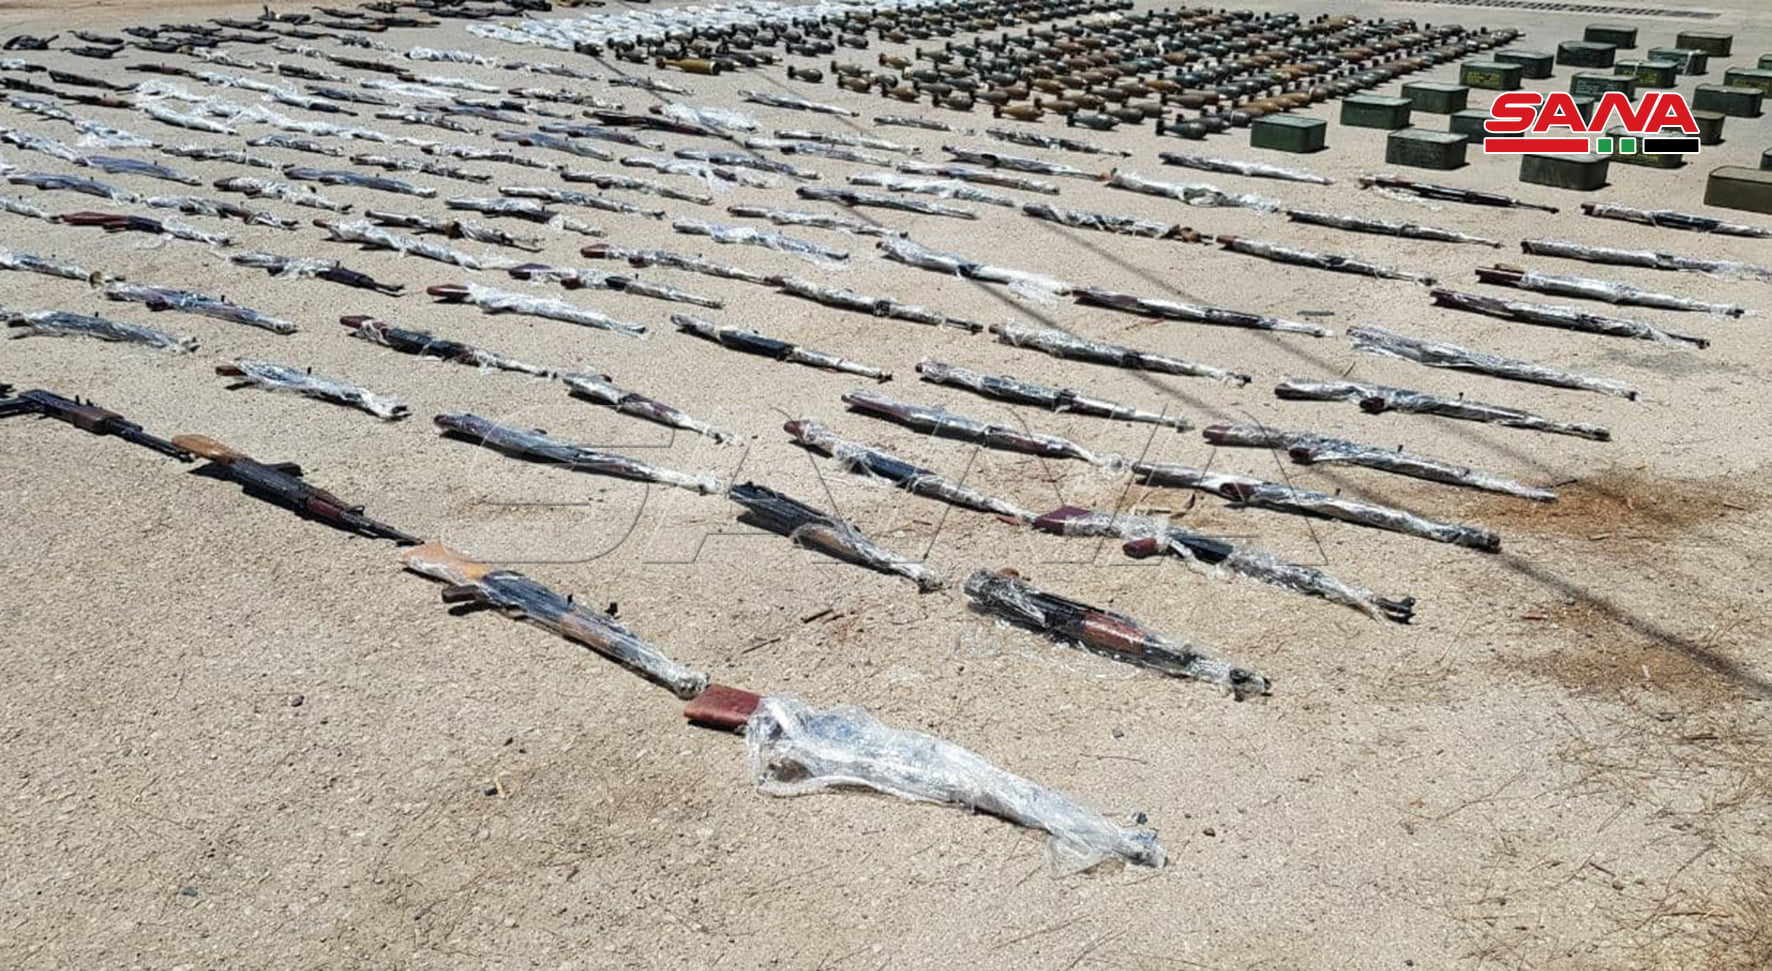 Syrian Authorities Uncovered Loads Of Weapons Left Behind By Militants In Homs (Photos)